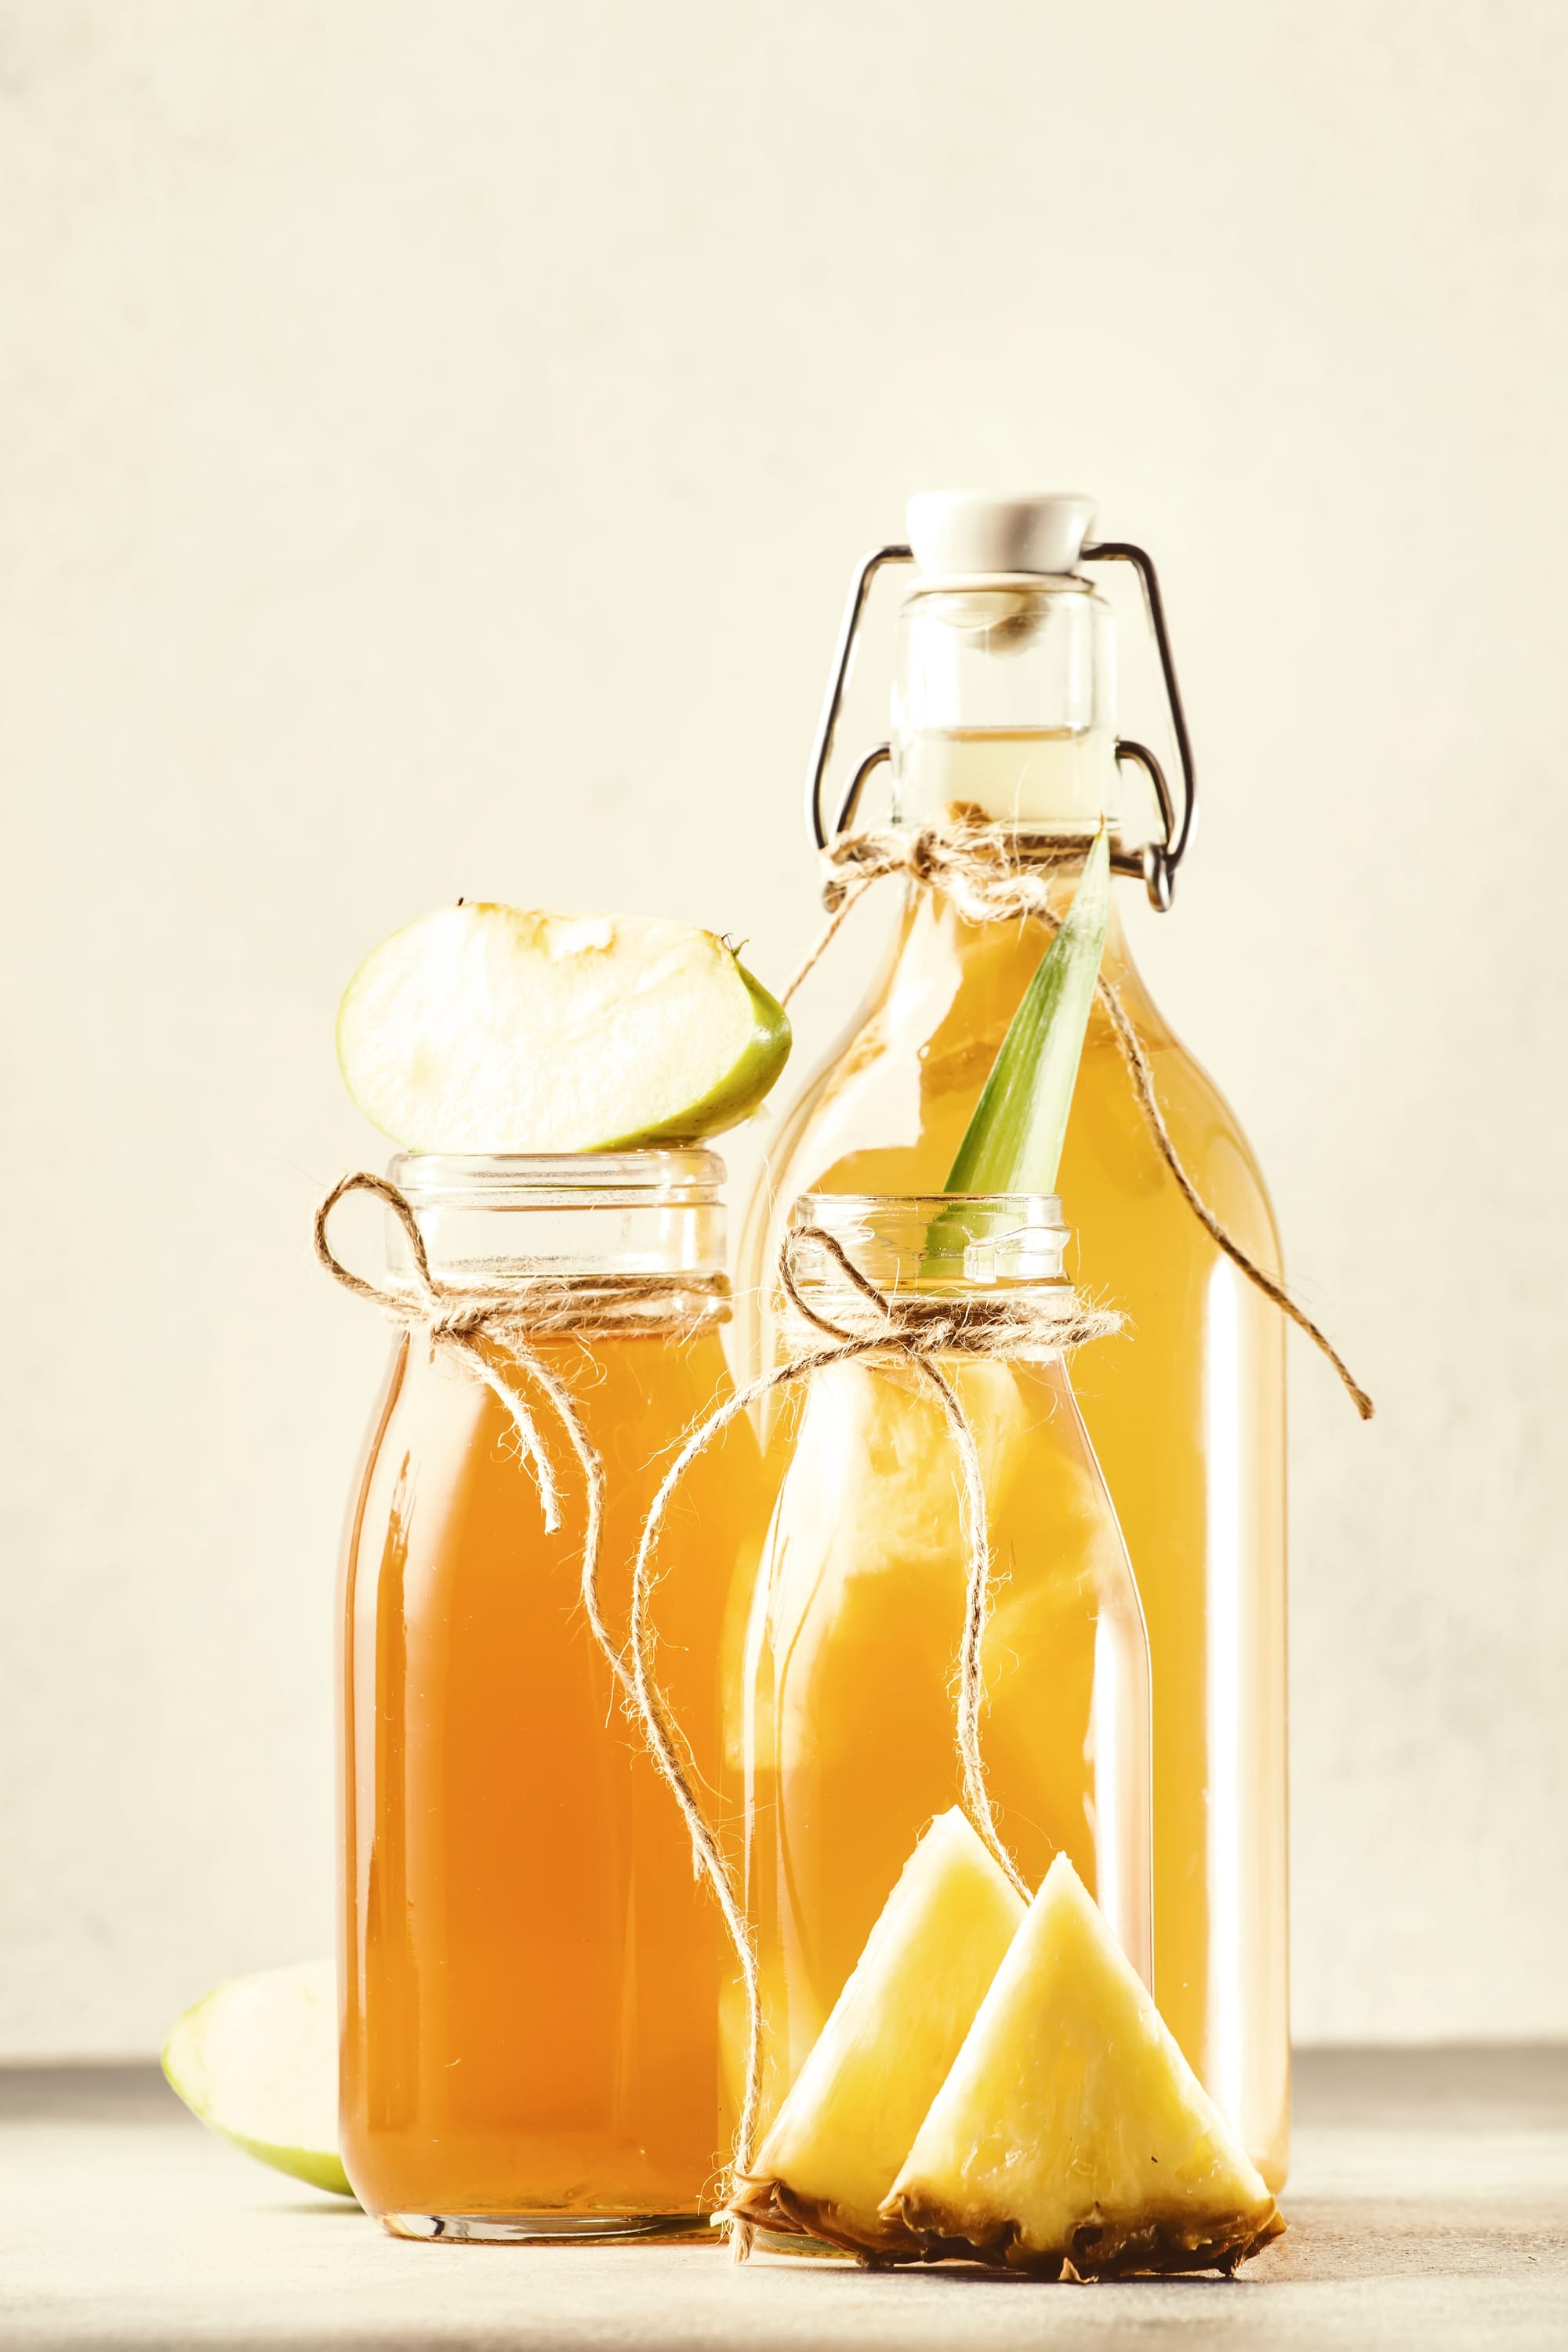 Side view of three bottles of tepache on an off-white background. There are two pieces of pineapple in front of the bottle. The bottles have string around the necks. One of the bottles also has a lid.